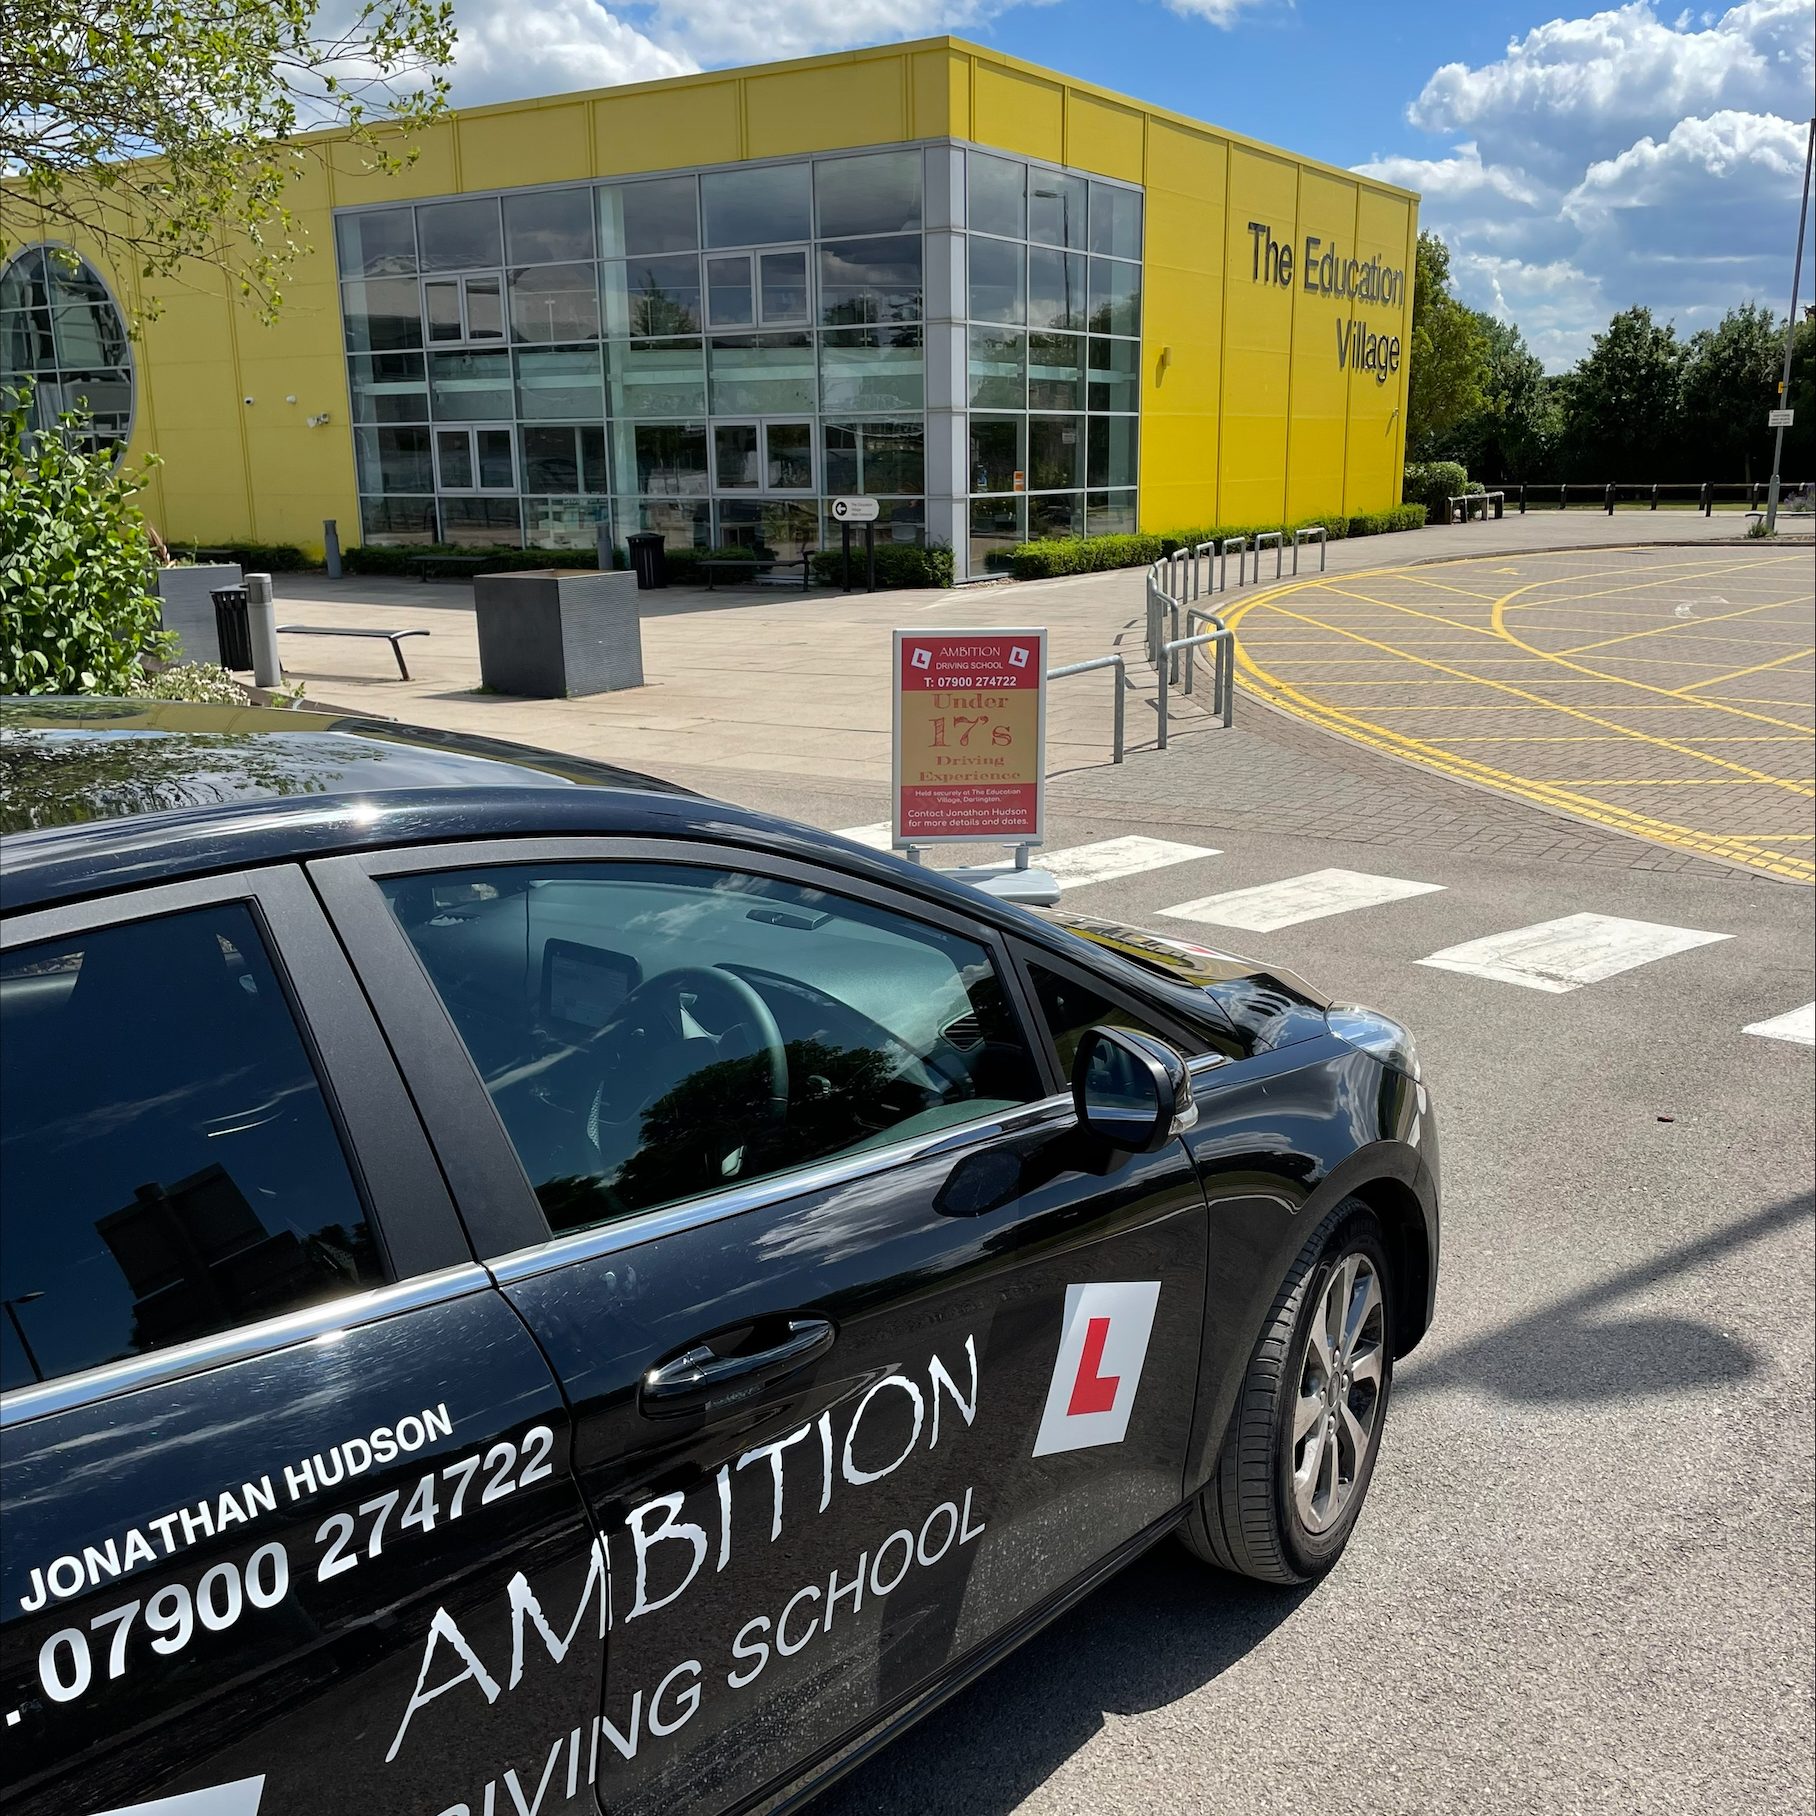 Ambition Driving school learner car parked outside the education village